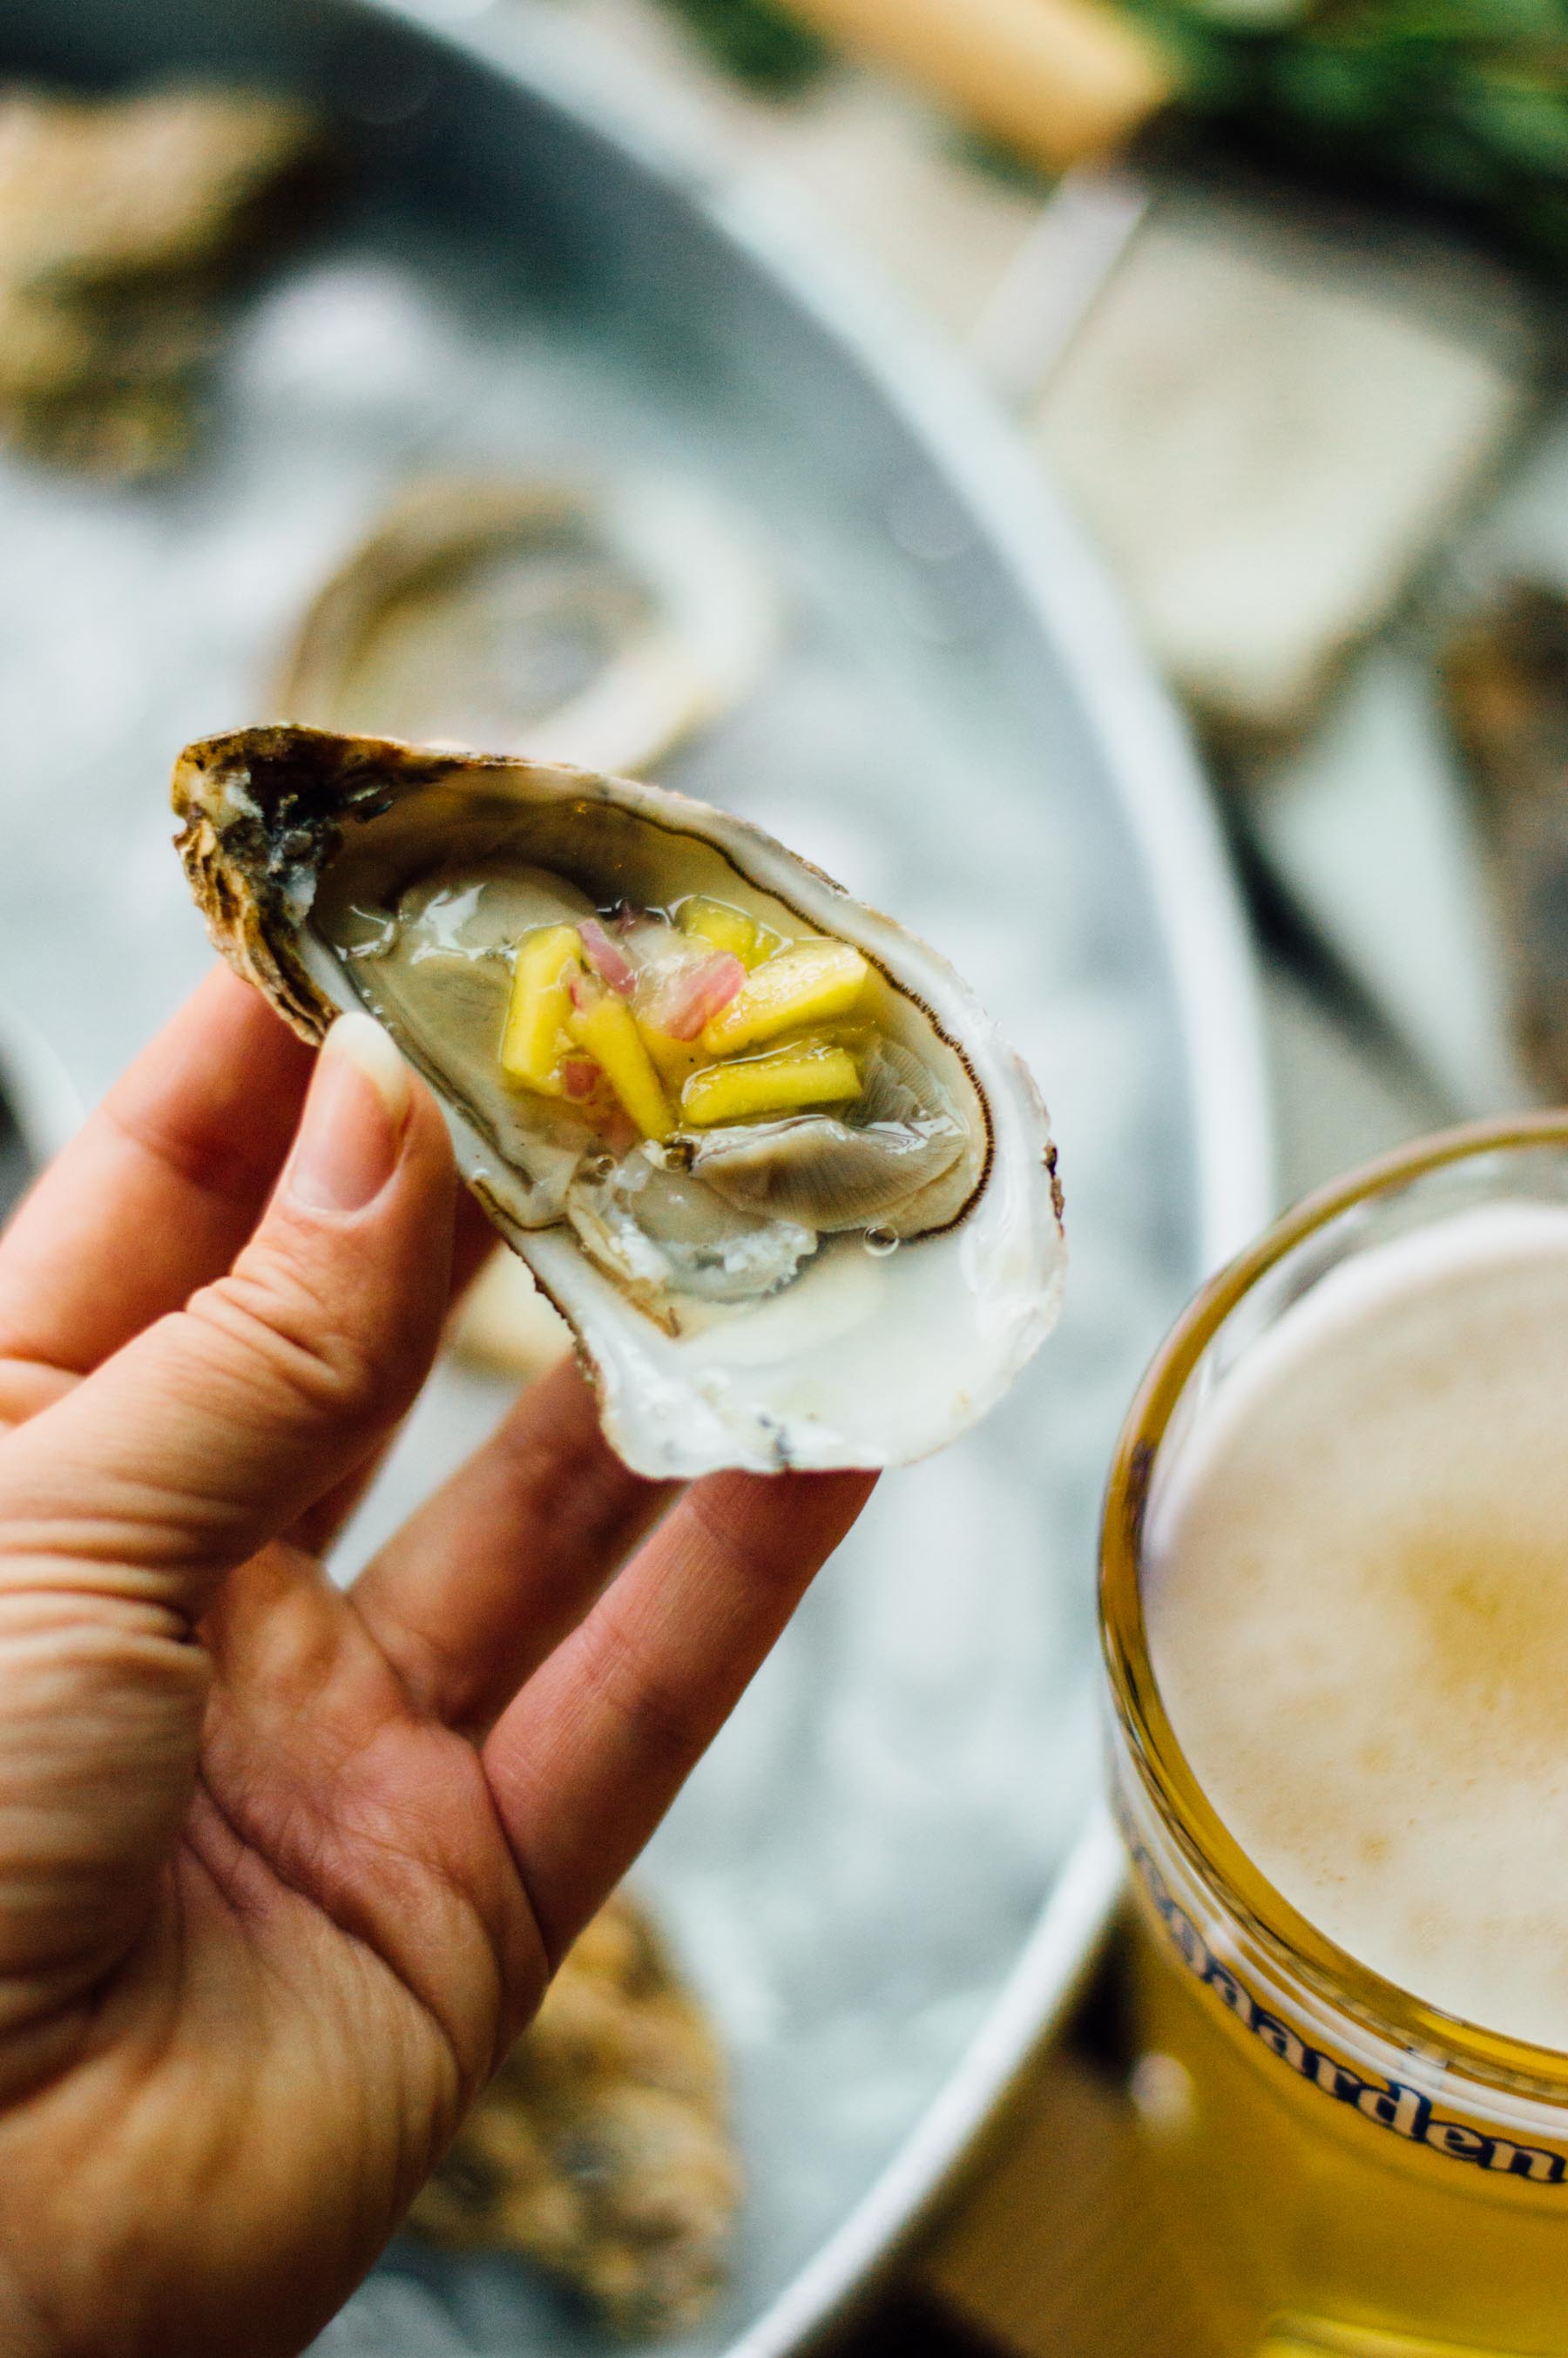 How to host an indoor oyster fest with Hoegaarden beer and 3 homemade mignonettes, like this mango mignonette | bygabriella.co